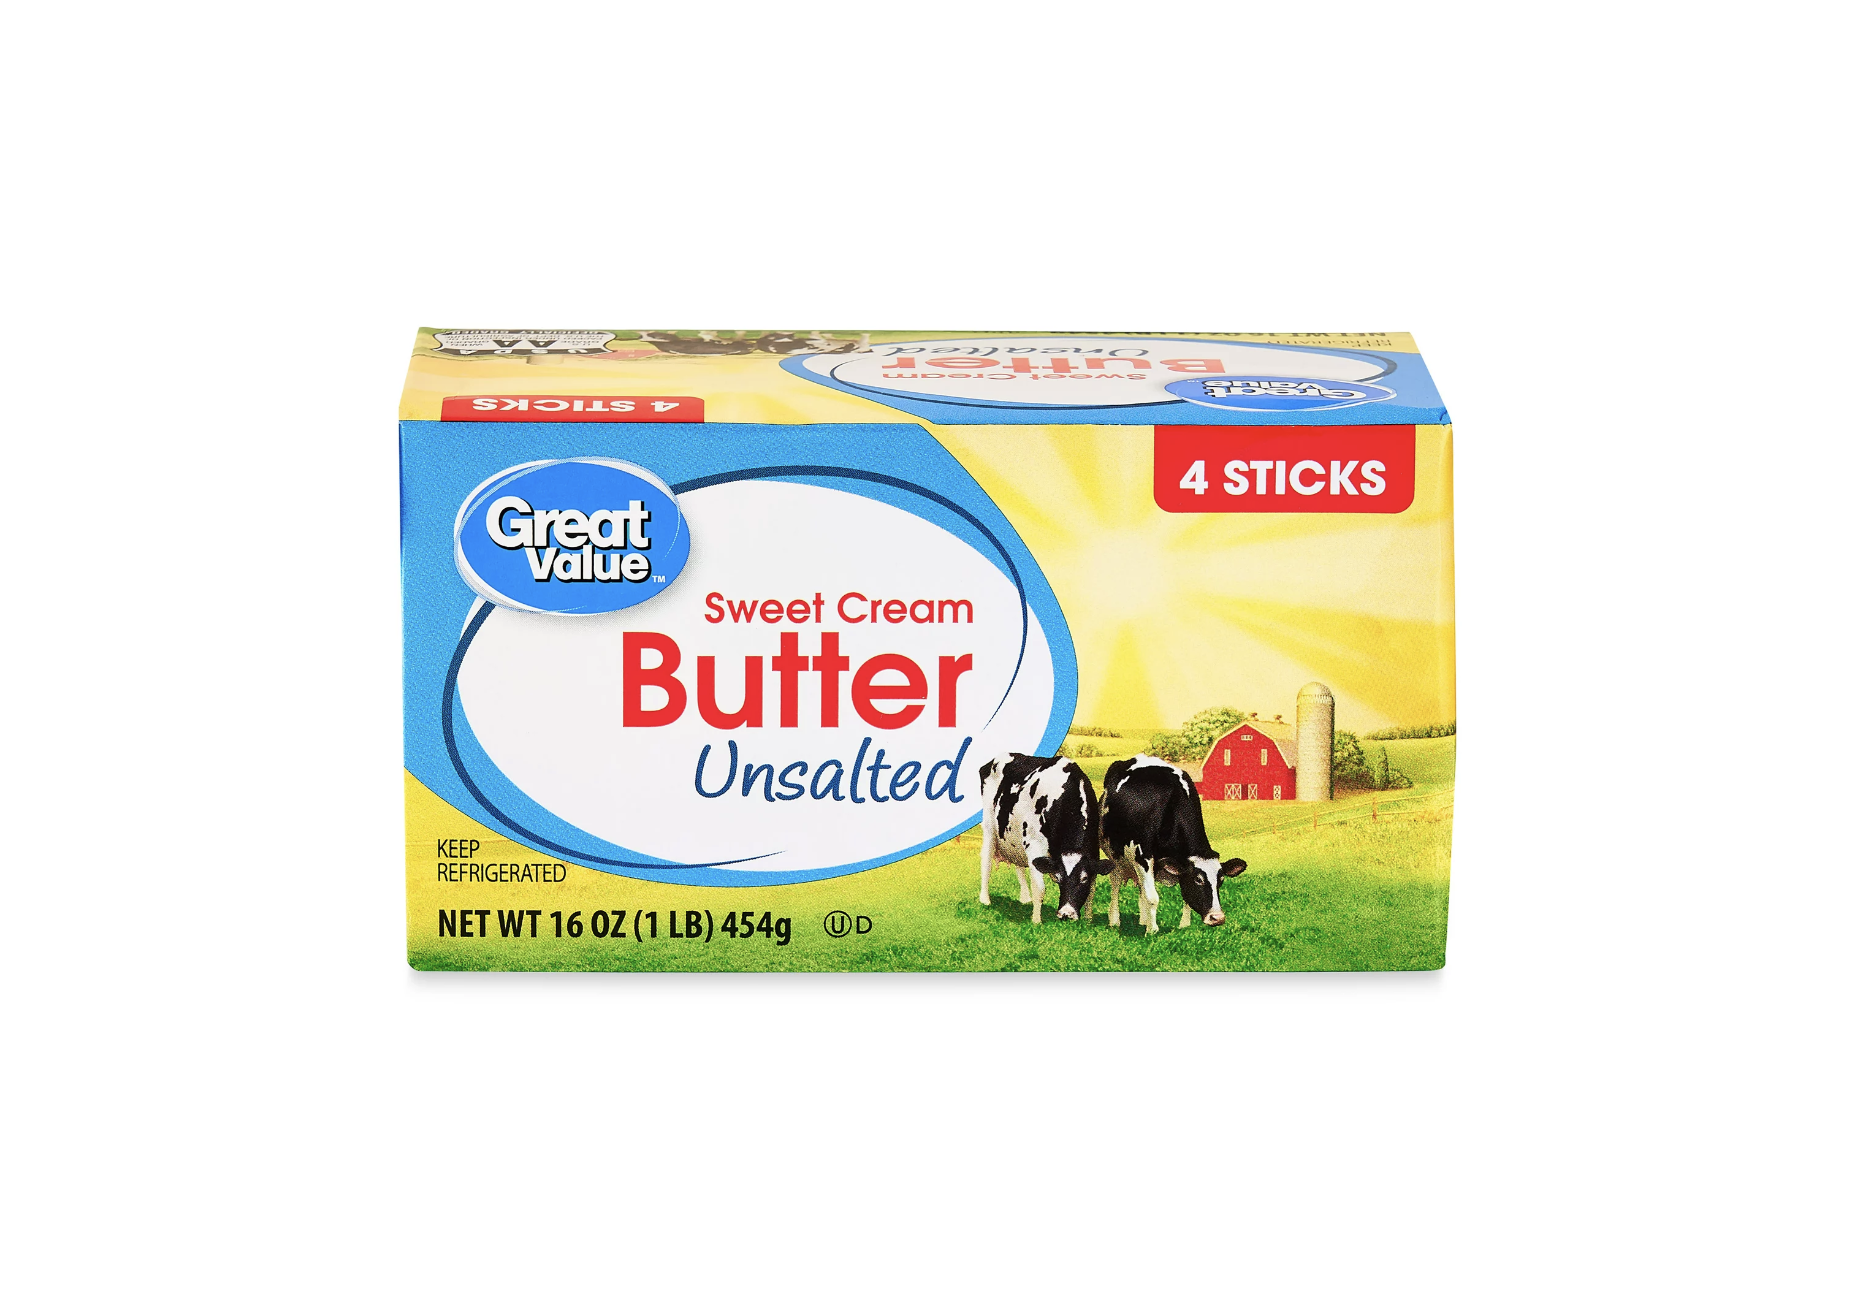 https://thekrazycouponlady.com/wp-content/uploads/2023/03/great-value-butter-2023-1677854591-1677854591.png